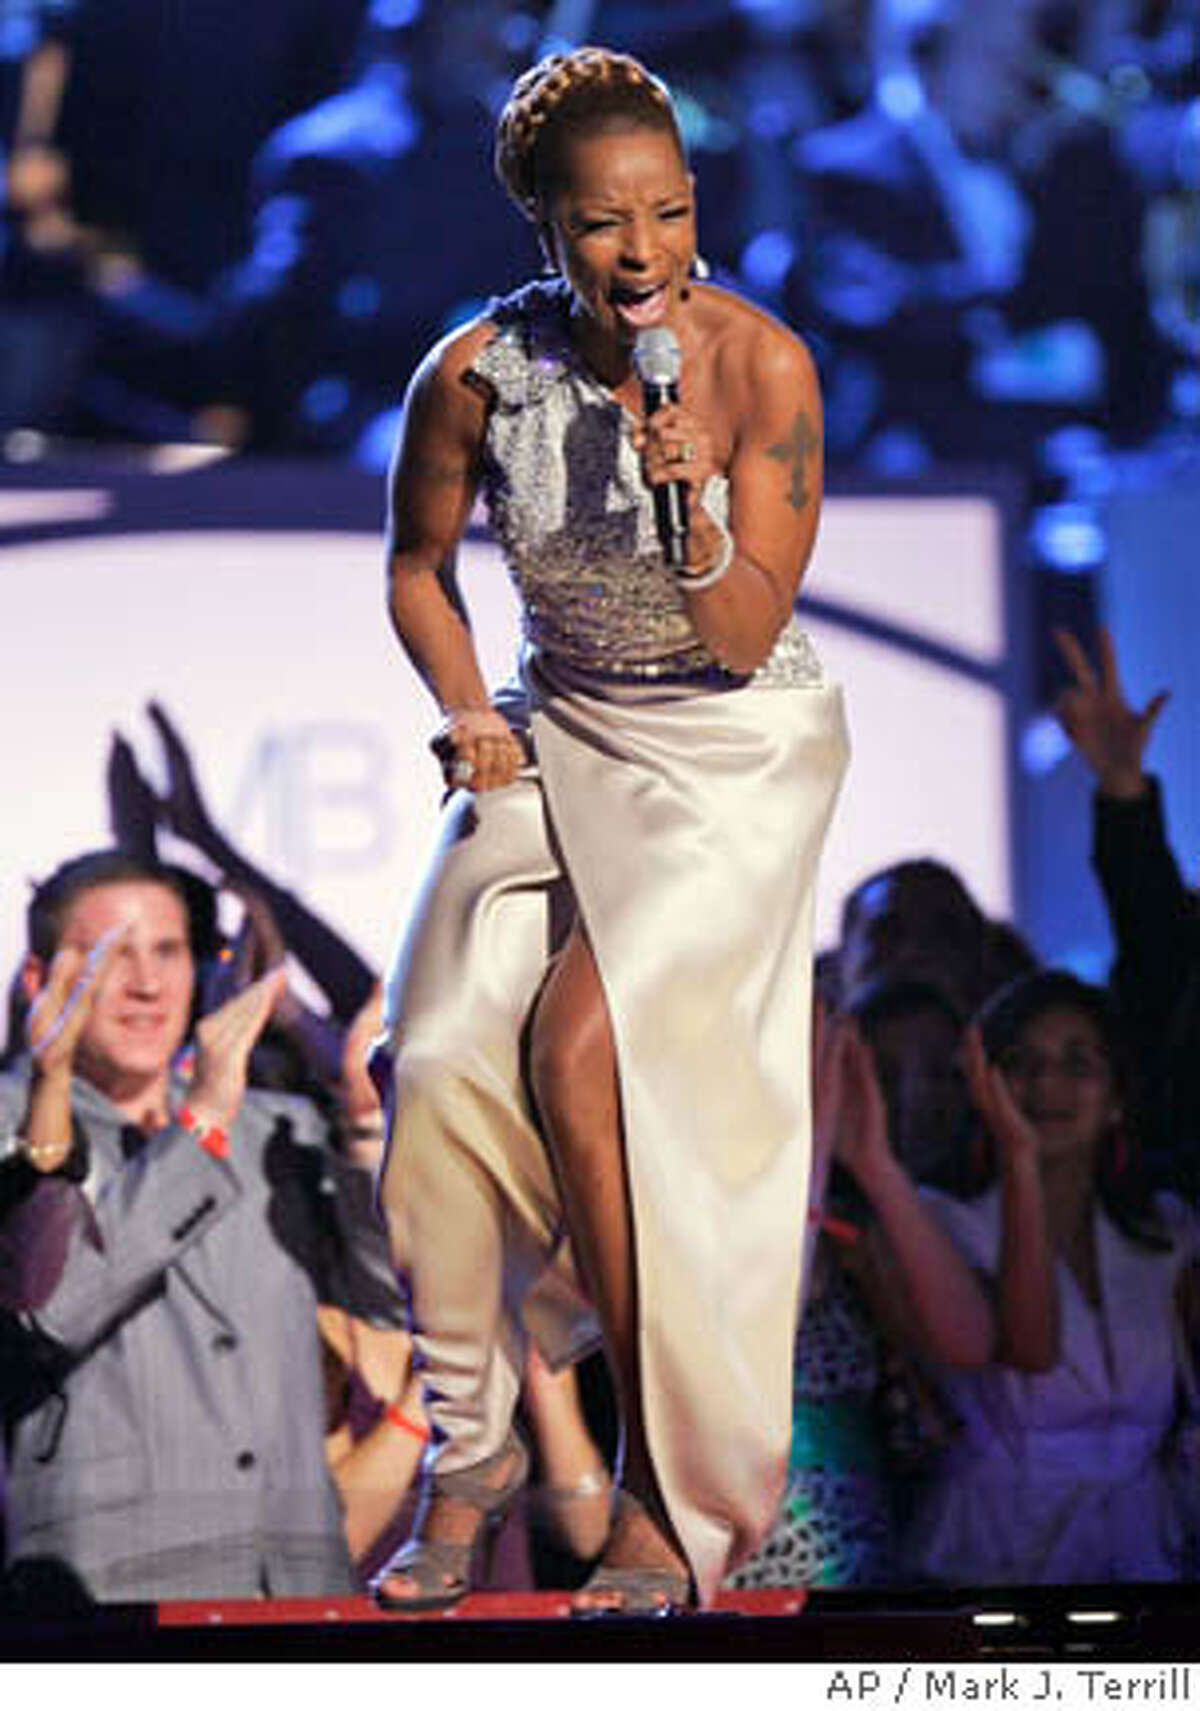 THE 49TH GRAMMY AWARDS / Mary J. Blige, Dixie Chicks triumph at a